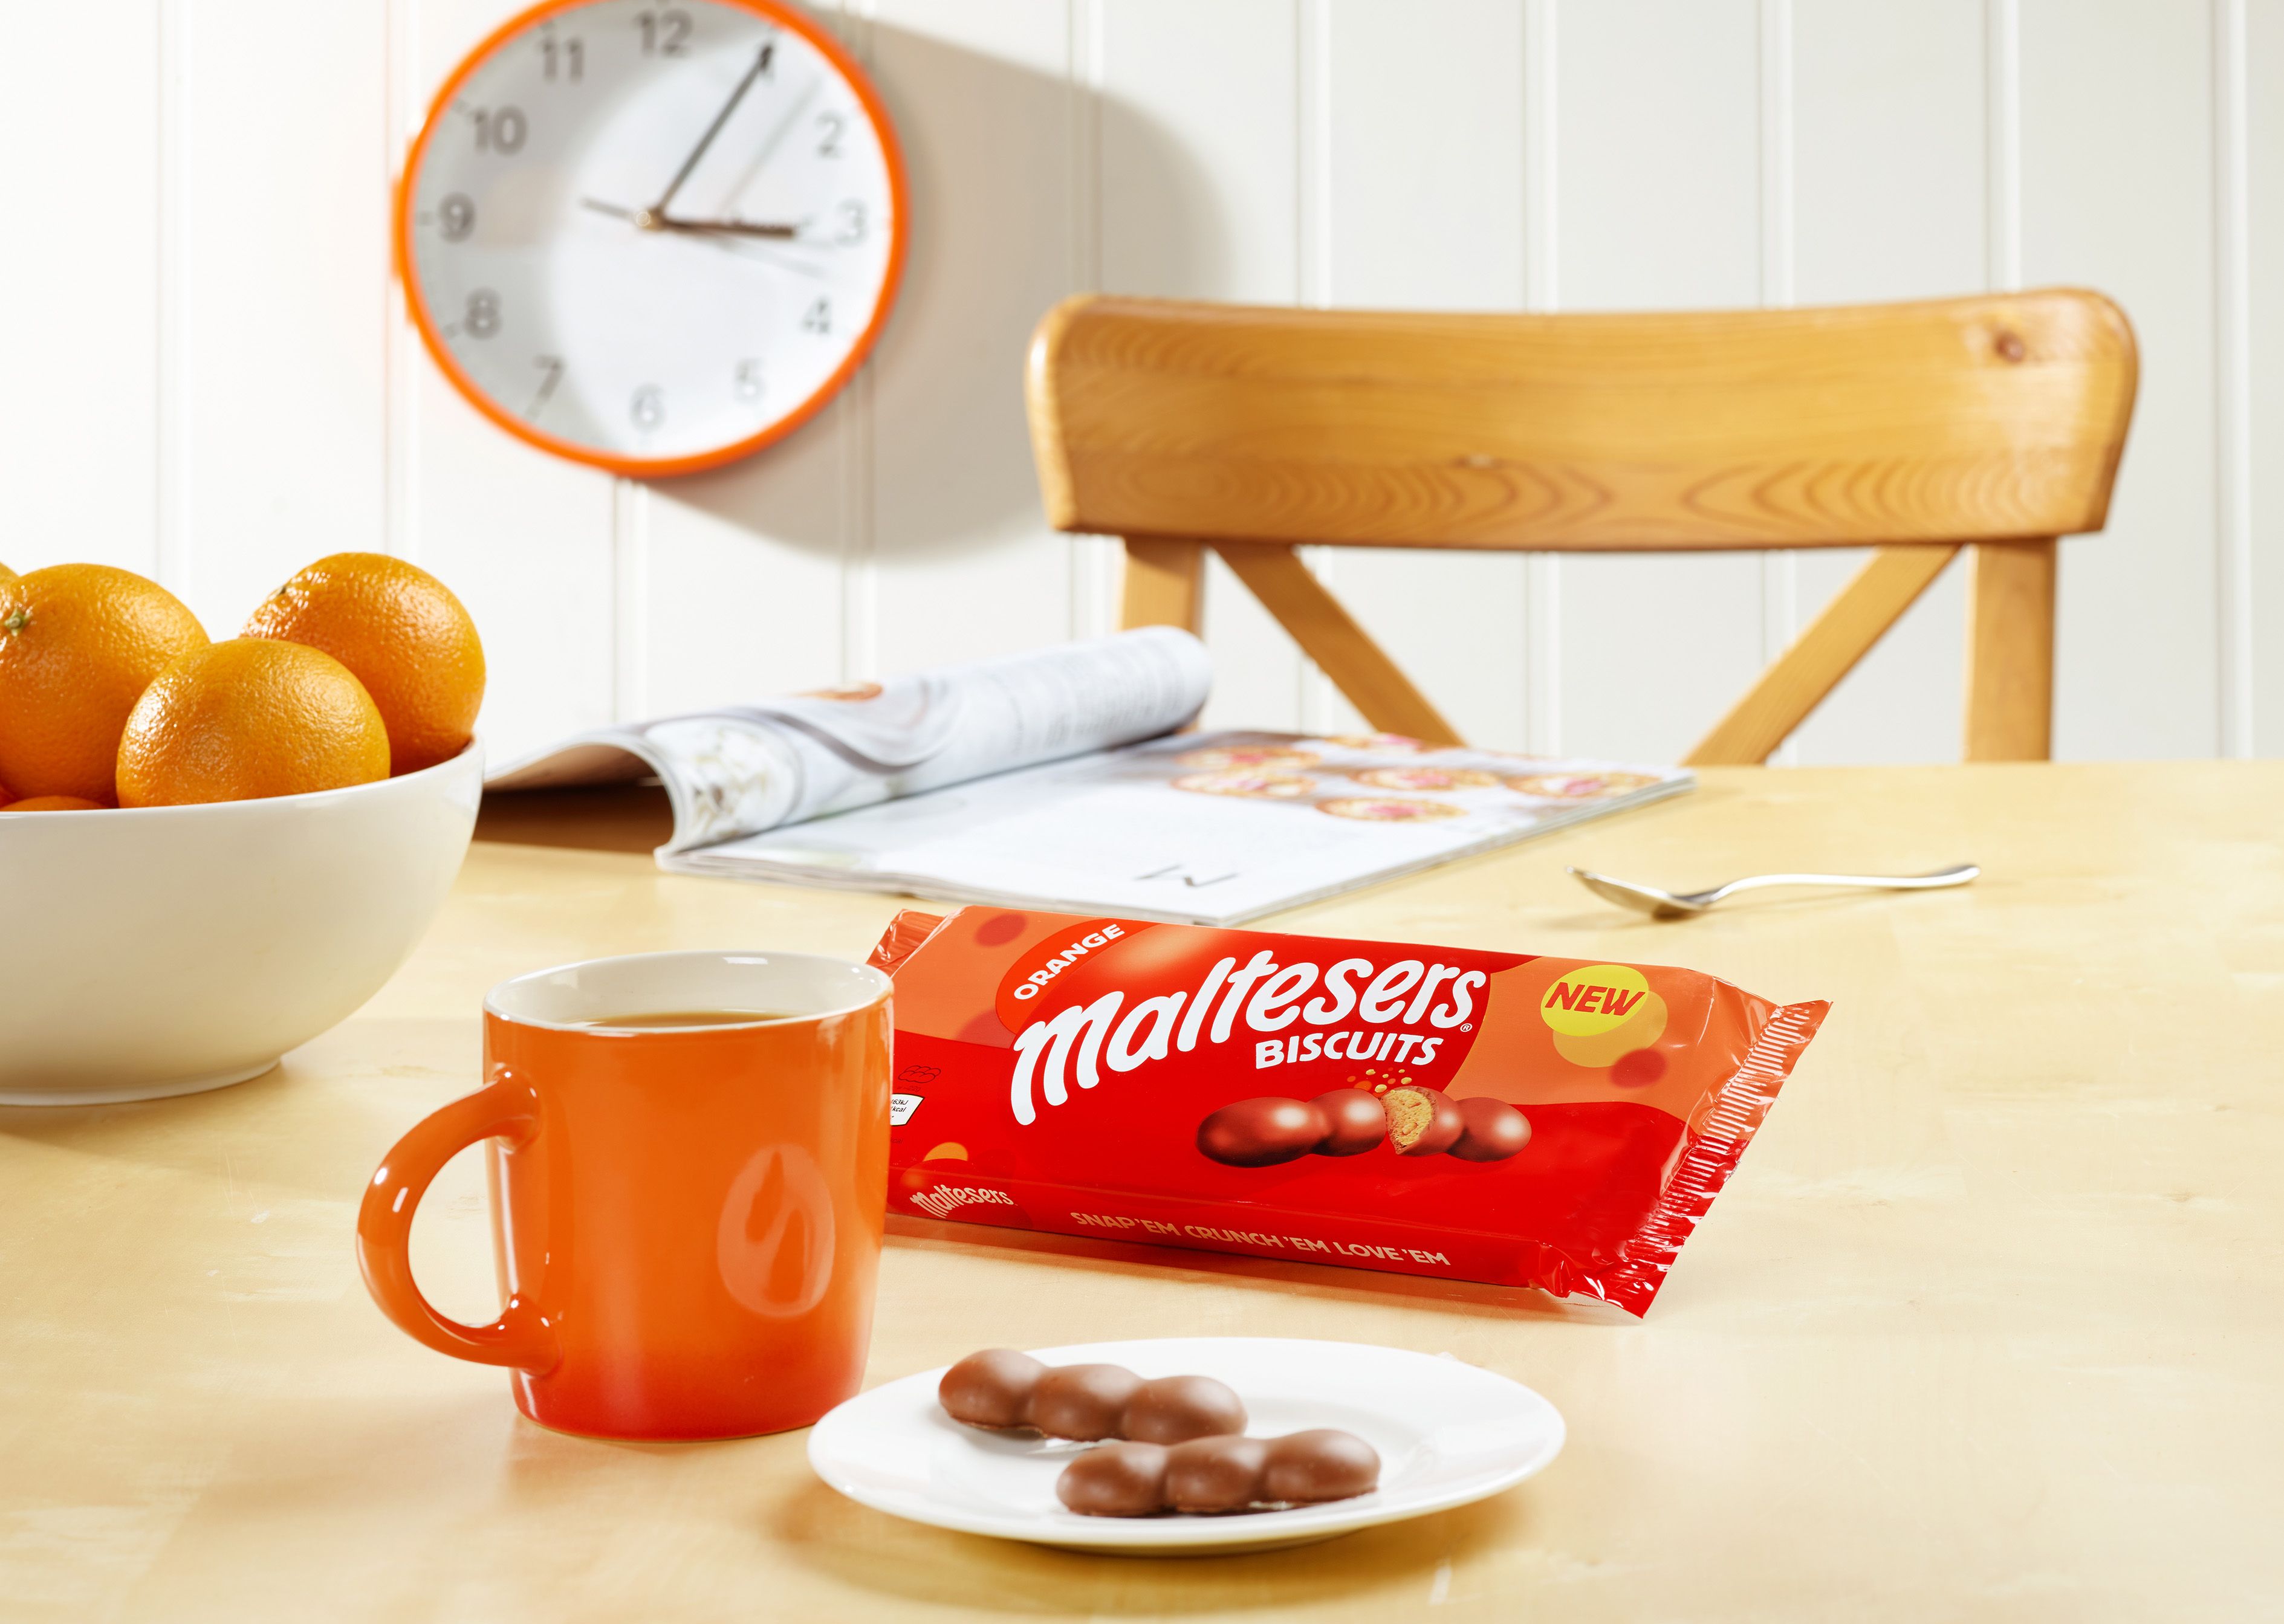 Orange Maltesers Biscuits are coming soon and we can't wait